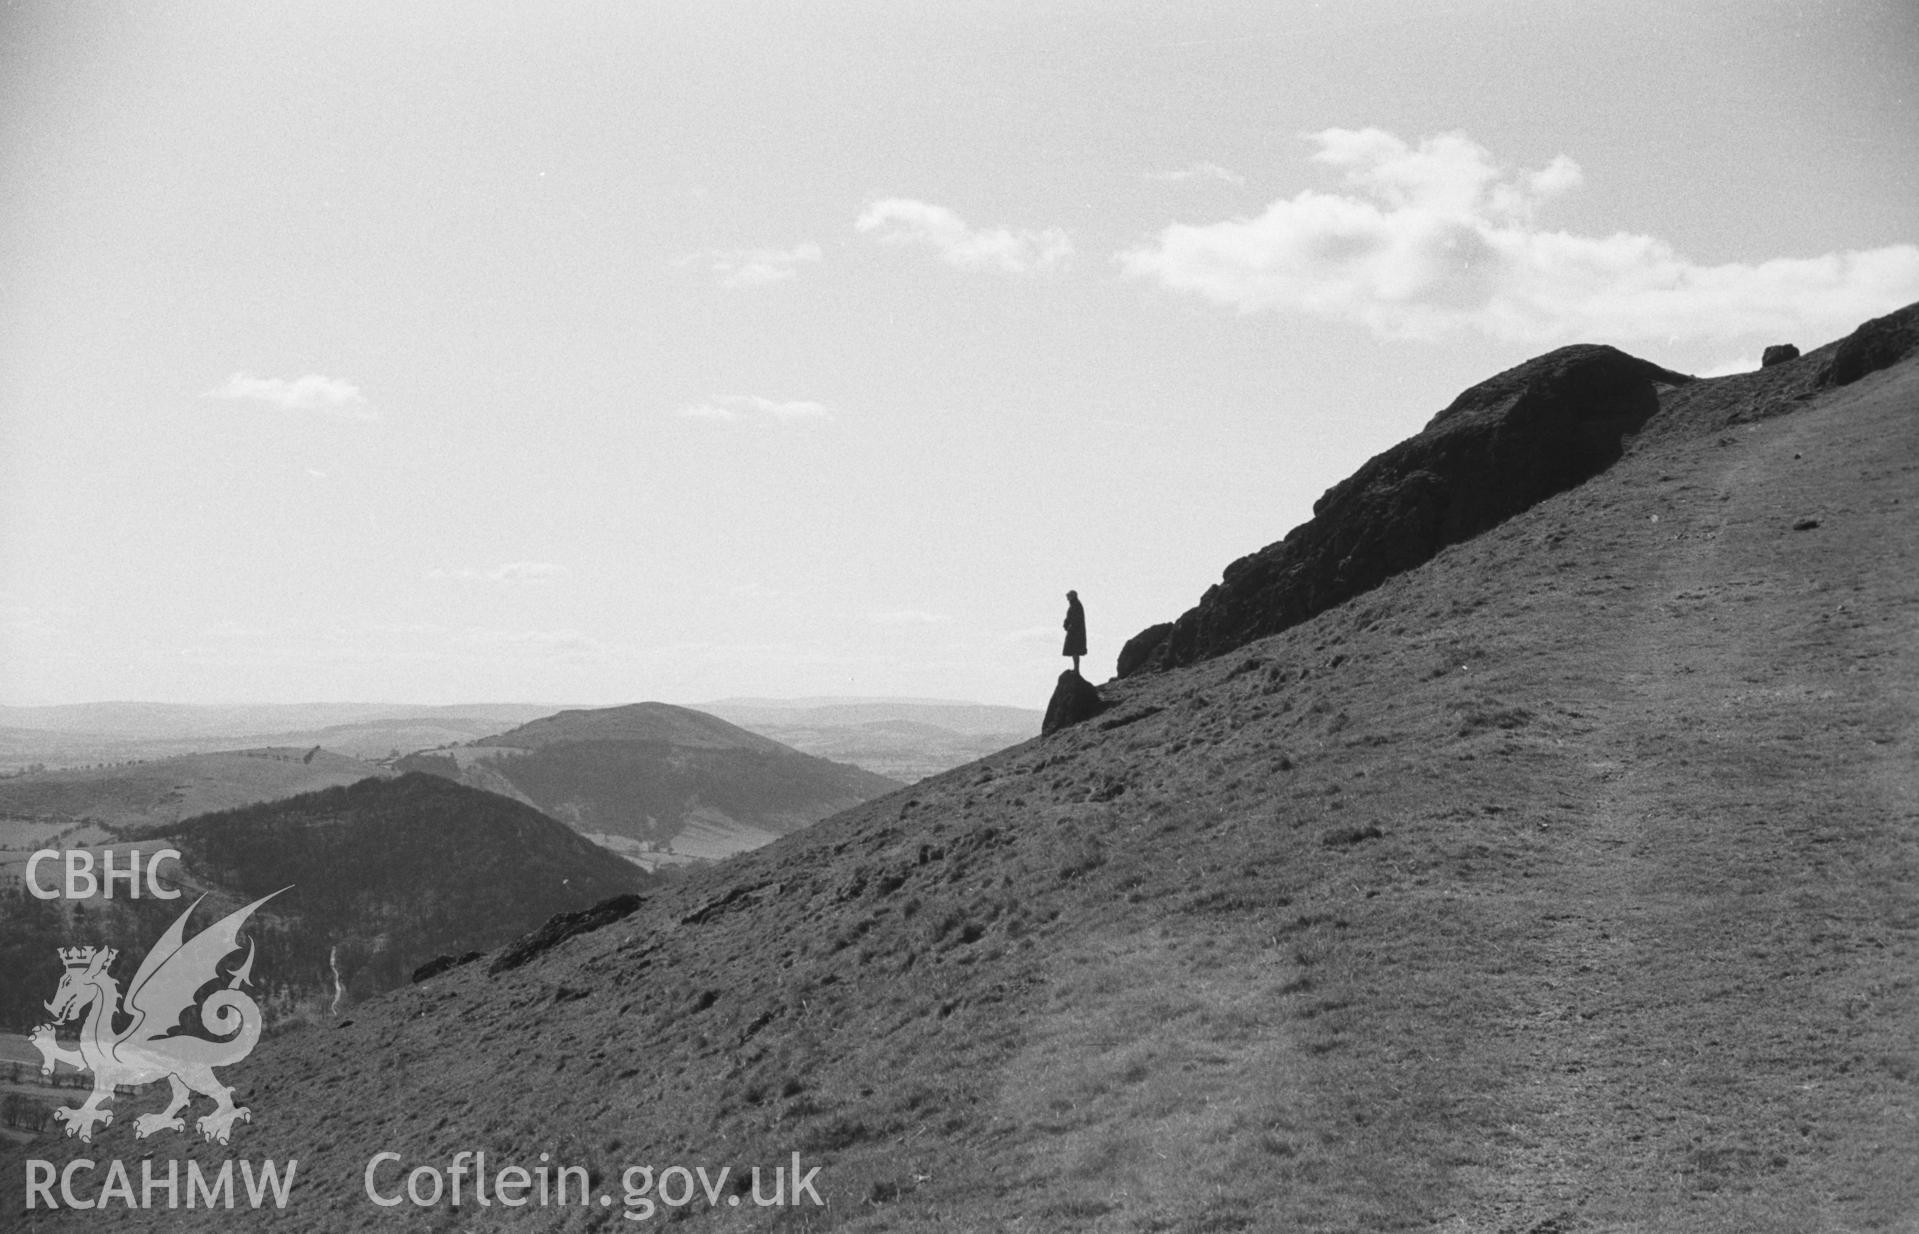 Digital copy of a black and white negative showing Caer Caradog, Shropshire, with figure in silhouette. Photographed in March 1964 by Arthur O. Chater.